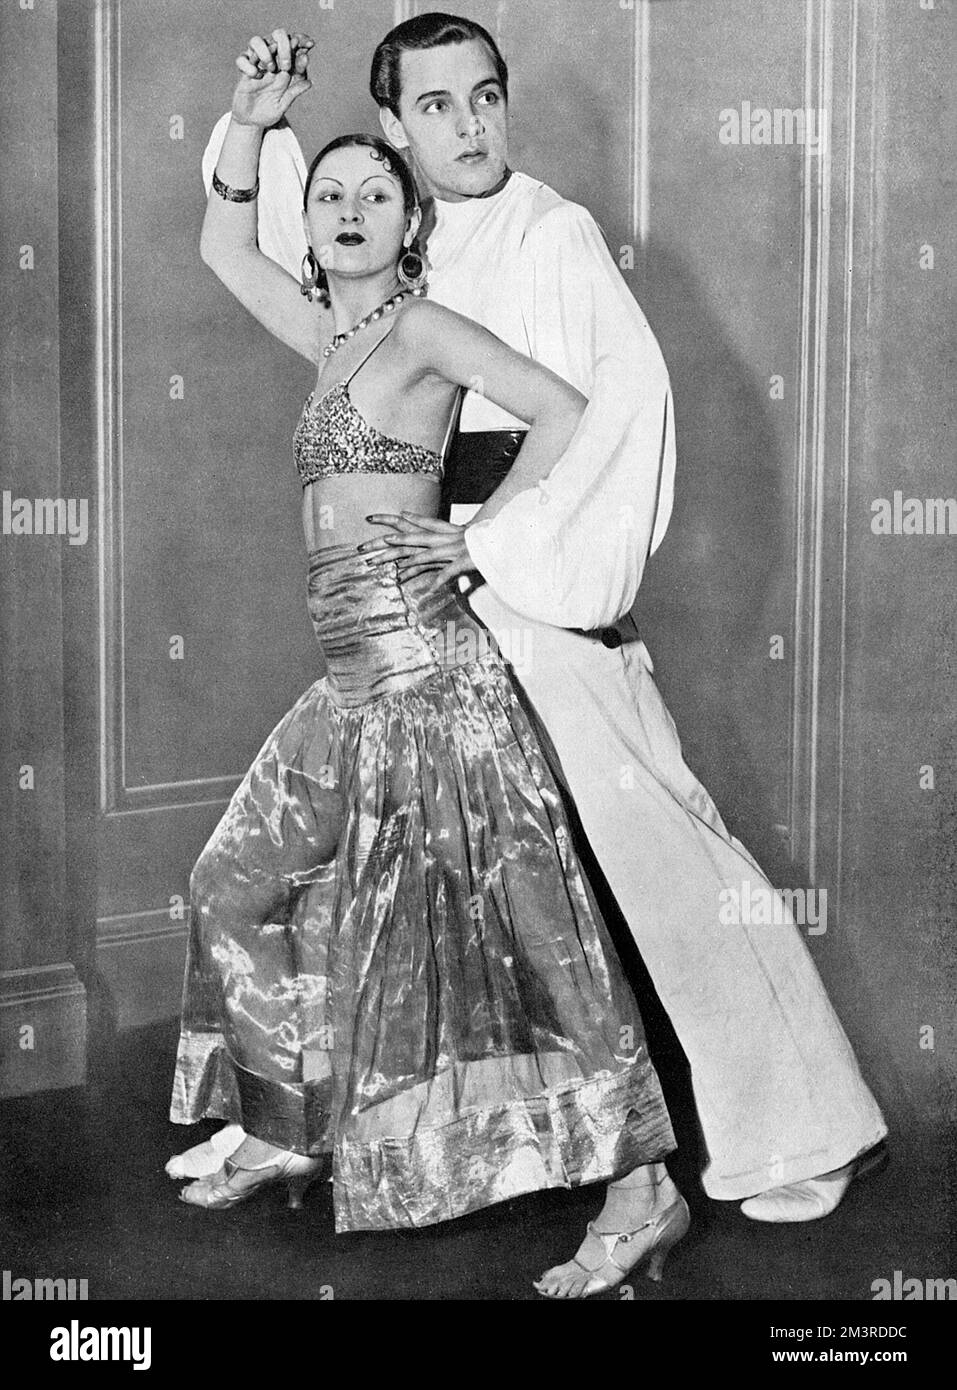 Mlle. Lya del Velez, the well-known dancer and her partner, Mr Brookes, in the costumes they wore at the Chelsea Arts Ball which took place on New Year's Eve at the Albert Hall, 1932.     Date: 1932 Stock Photo